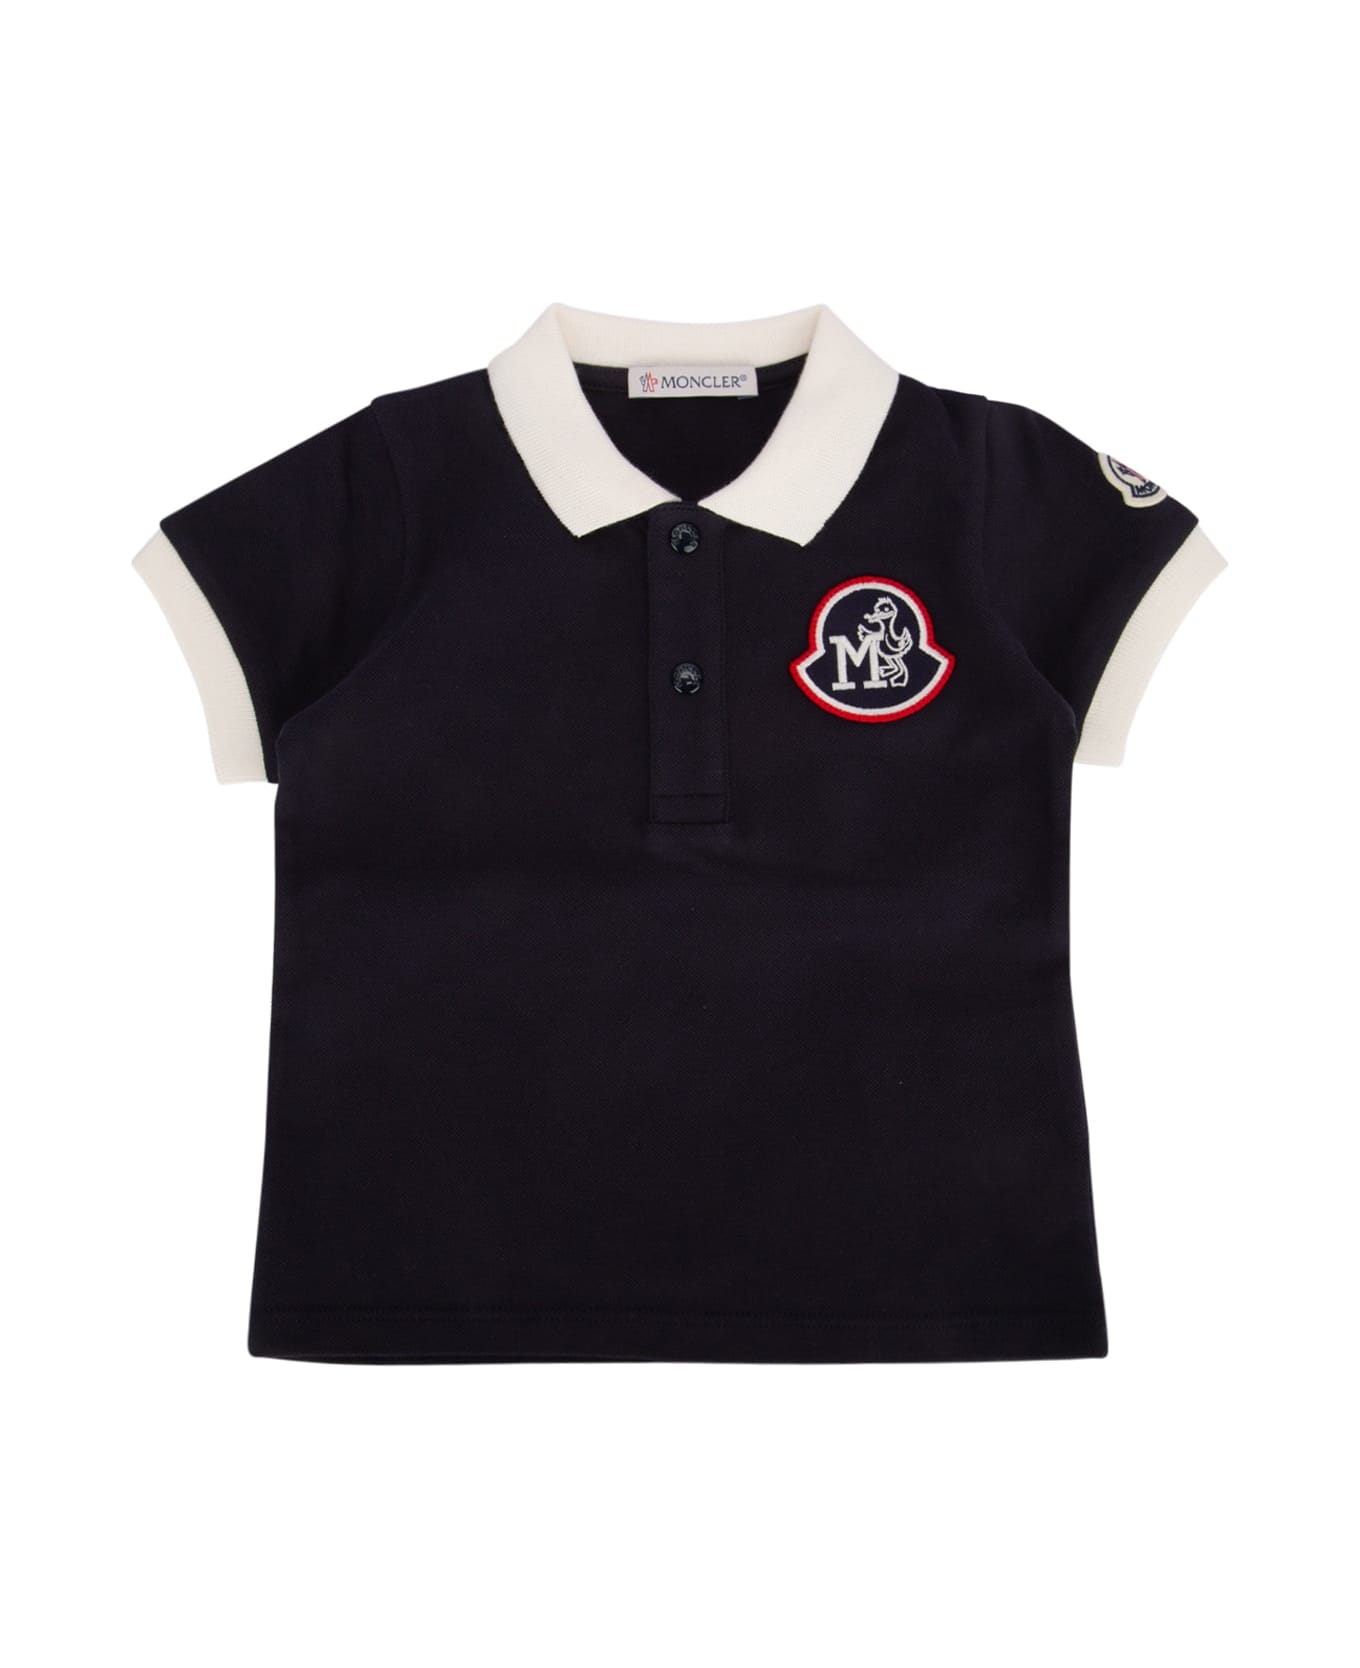 Moncler Polo - 778 Tシャツ＆ポロシャツ